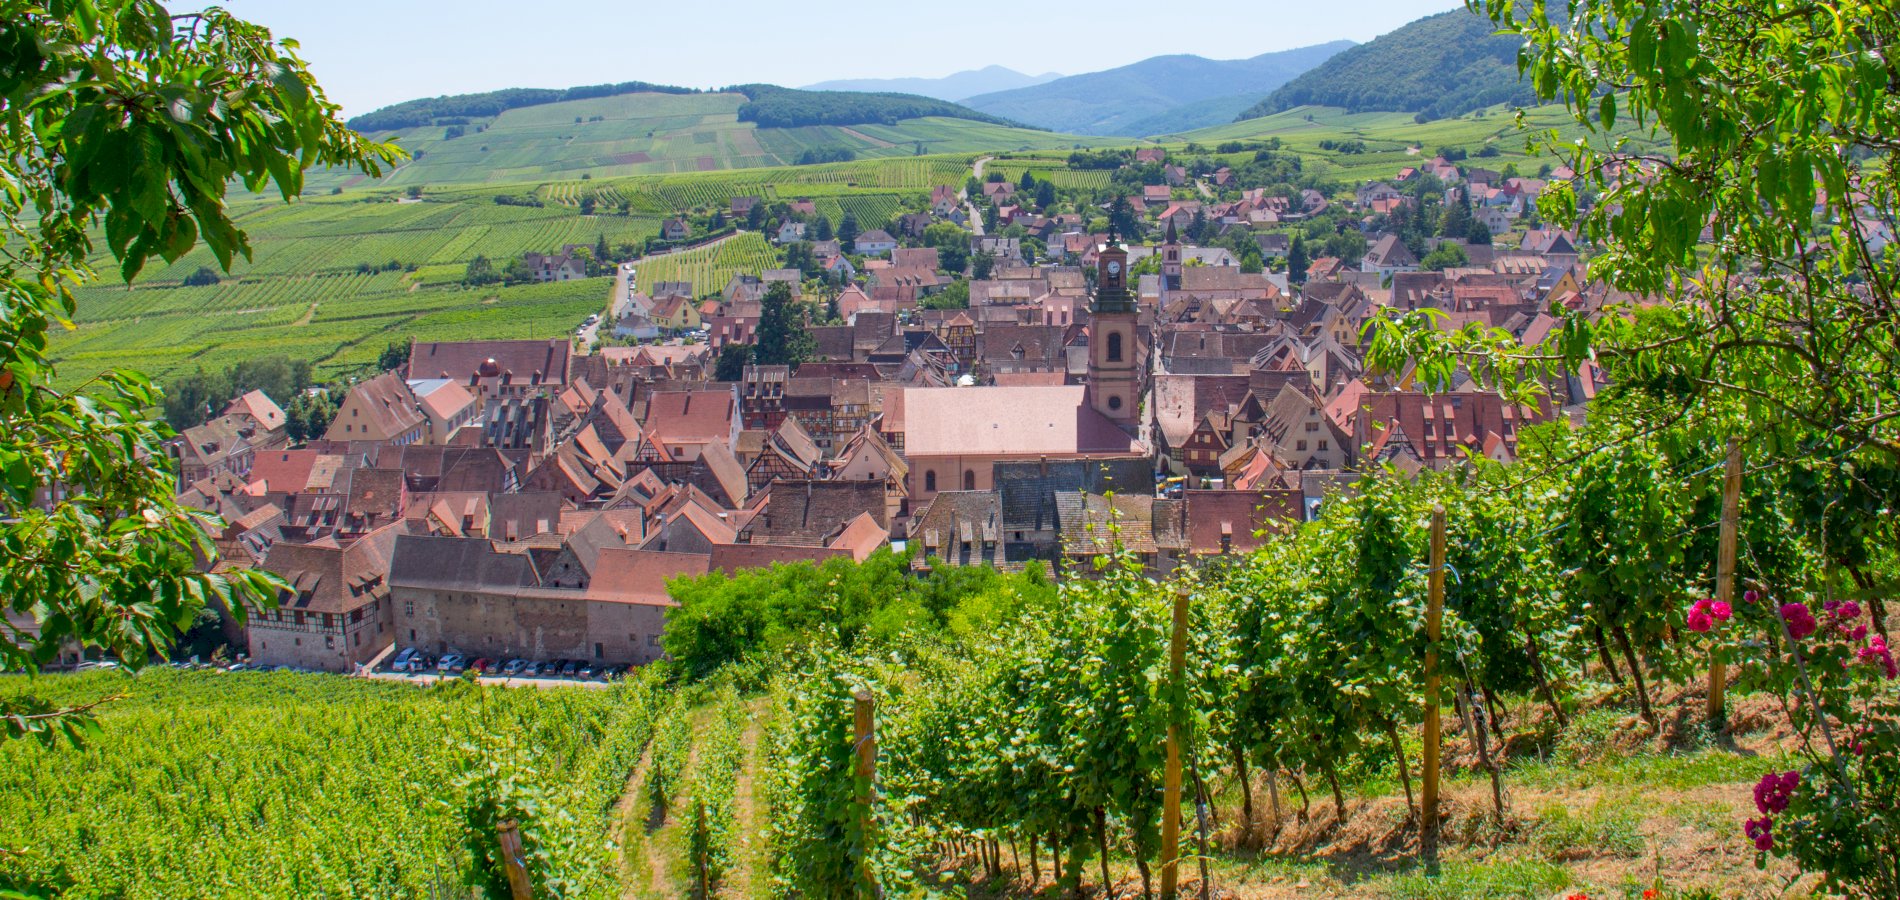 Ophorus Tours - Alsace Wine Tour Private Half Day Trip from Colmar for 2 persons